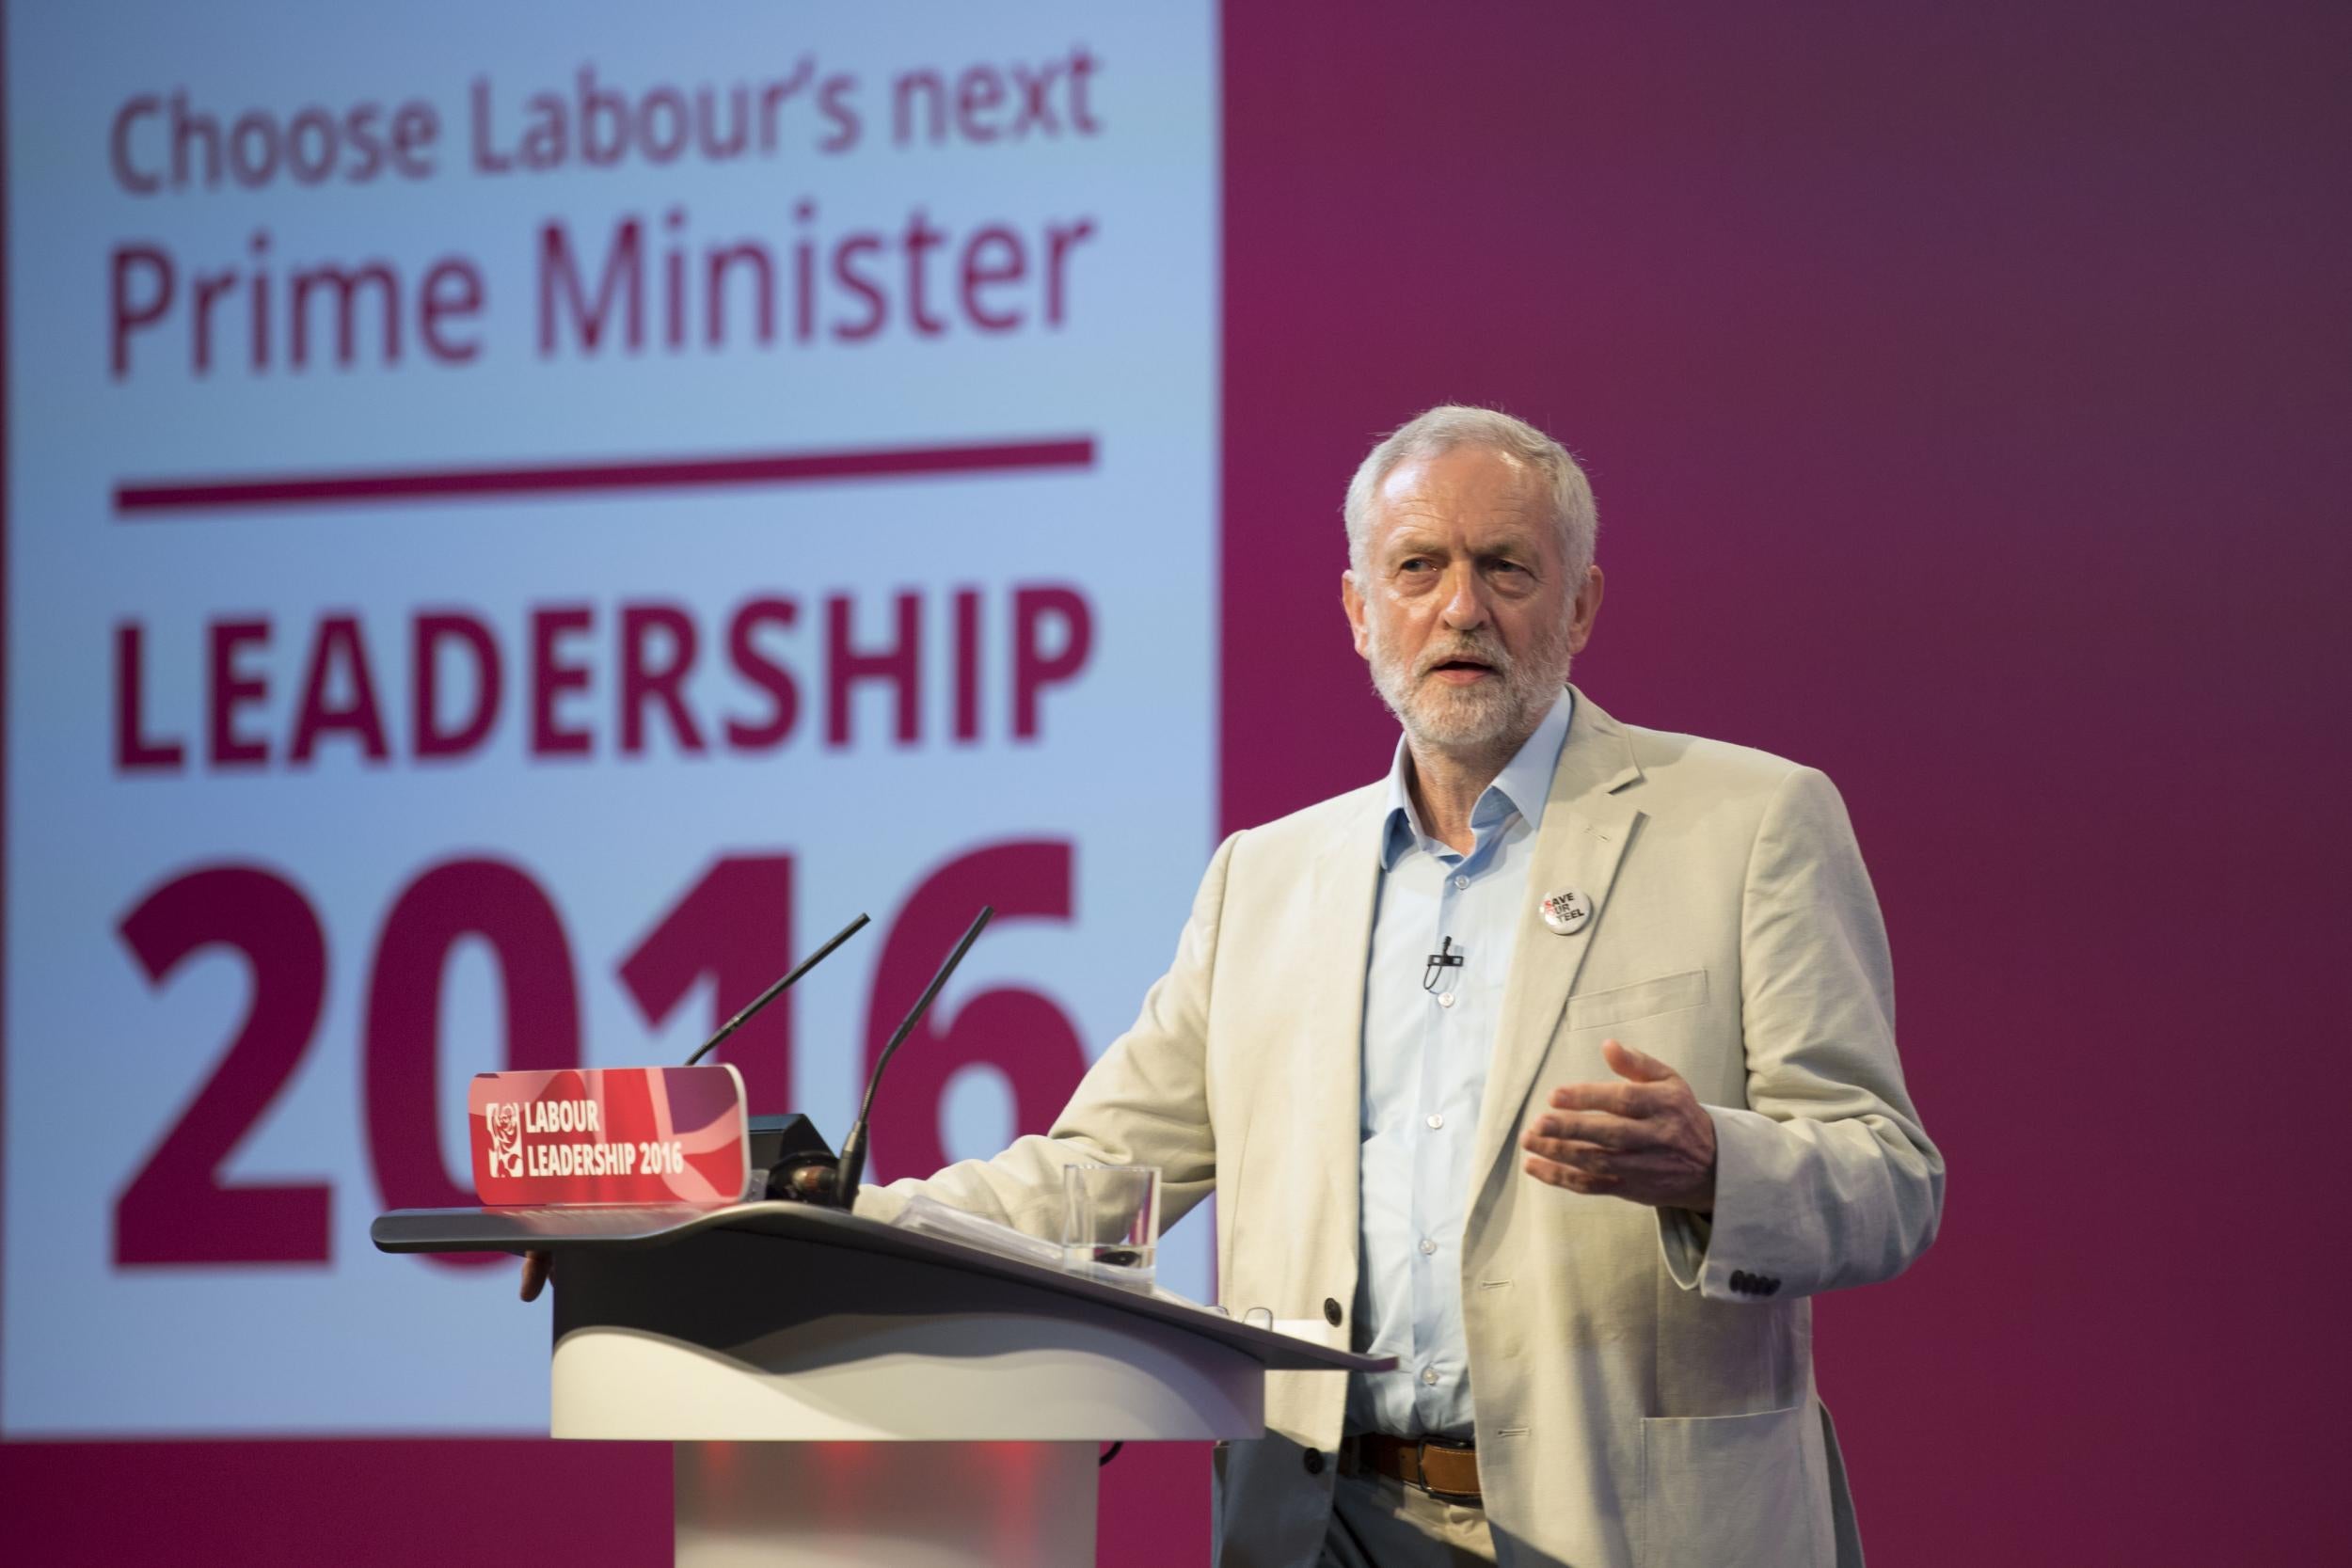 Jeremy Corbyn is facing a challenge for the Labour leadership from Welsh MP Owen Smith